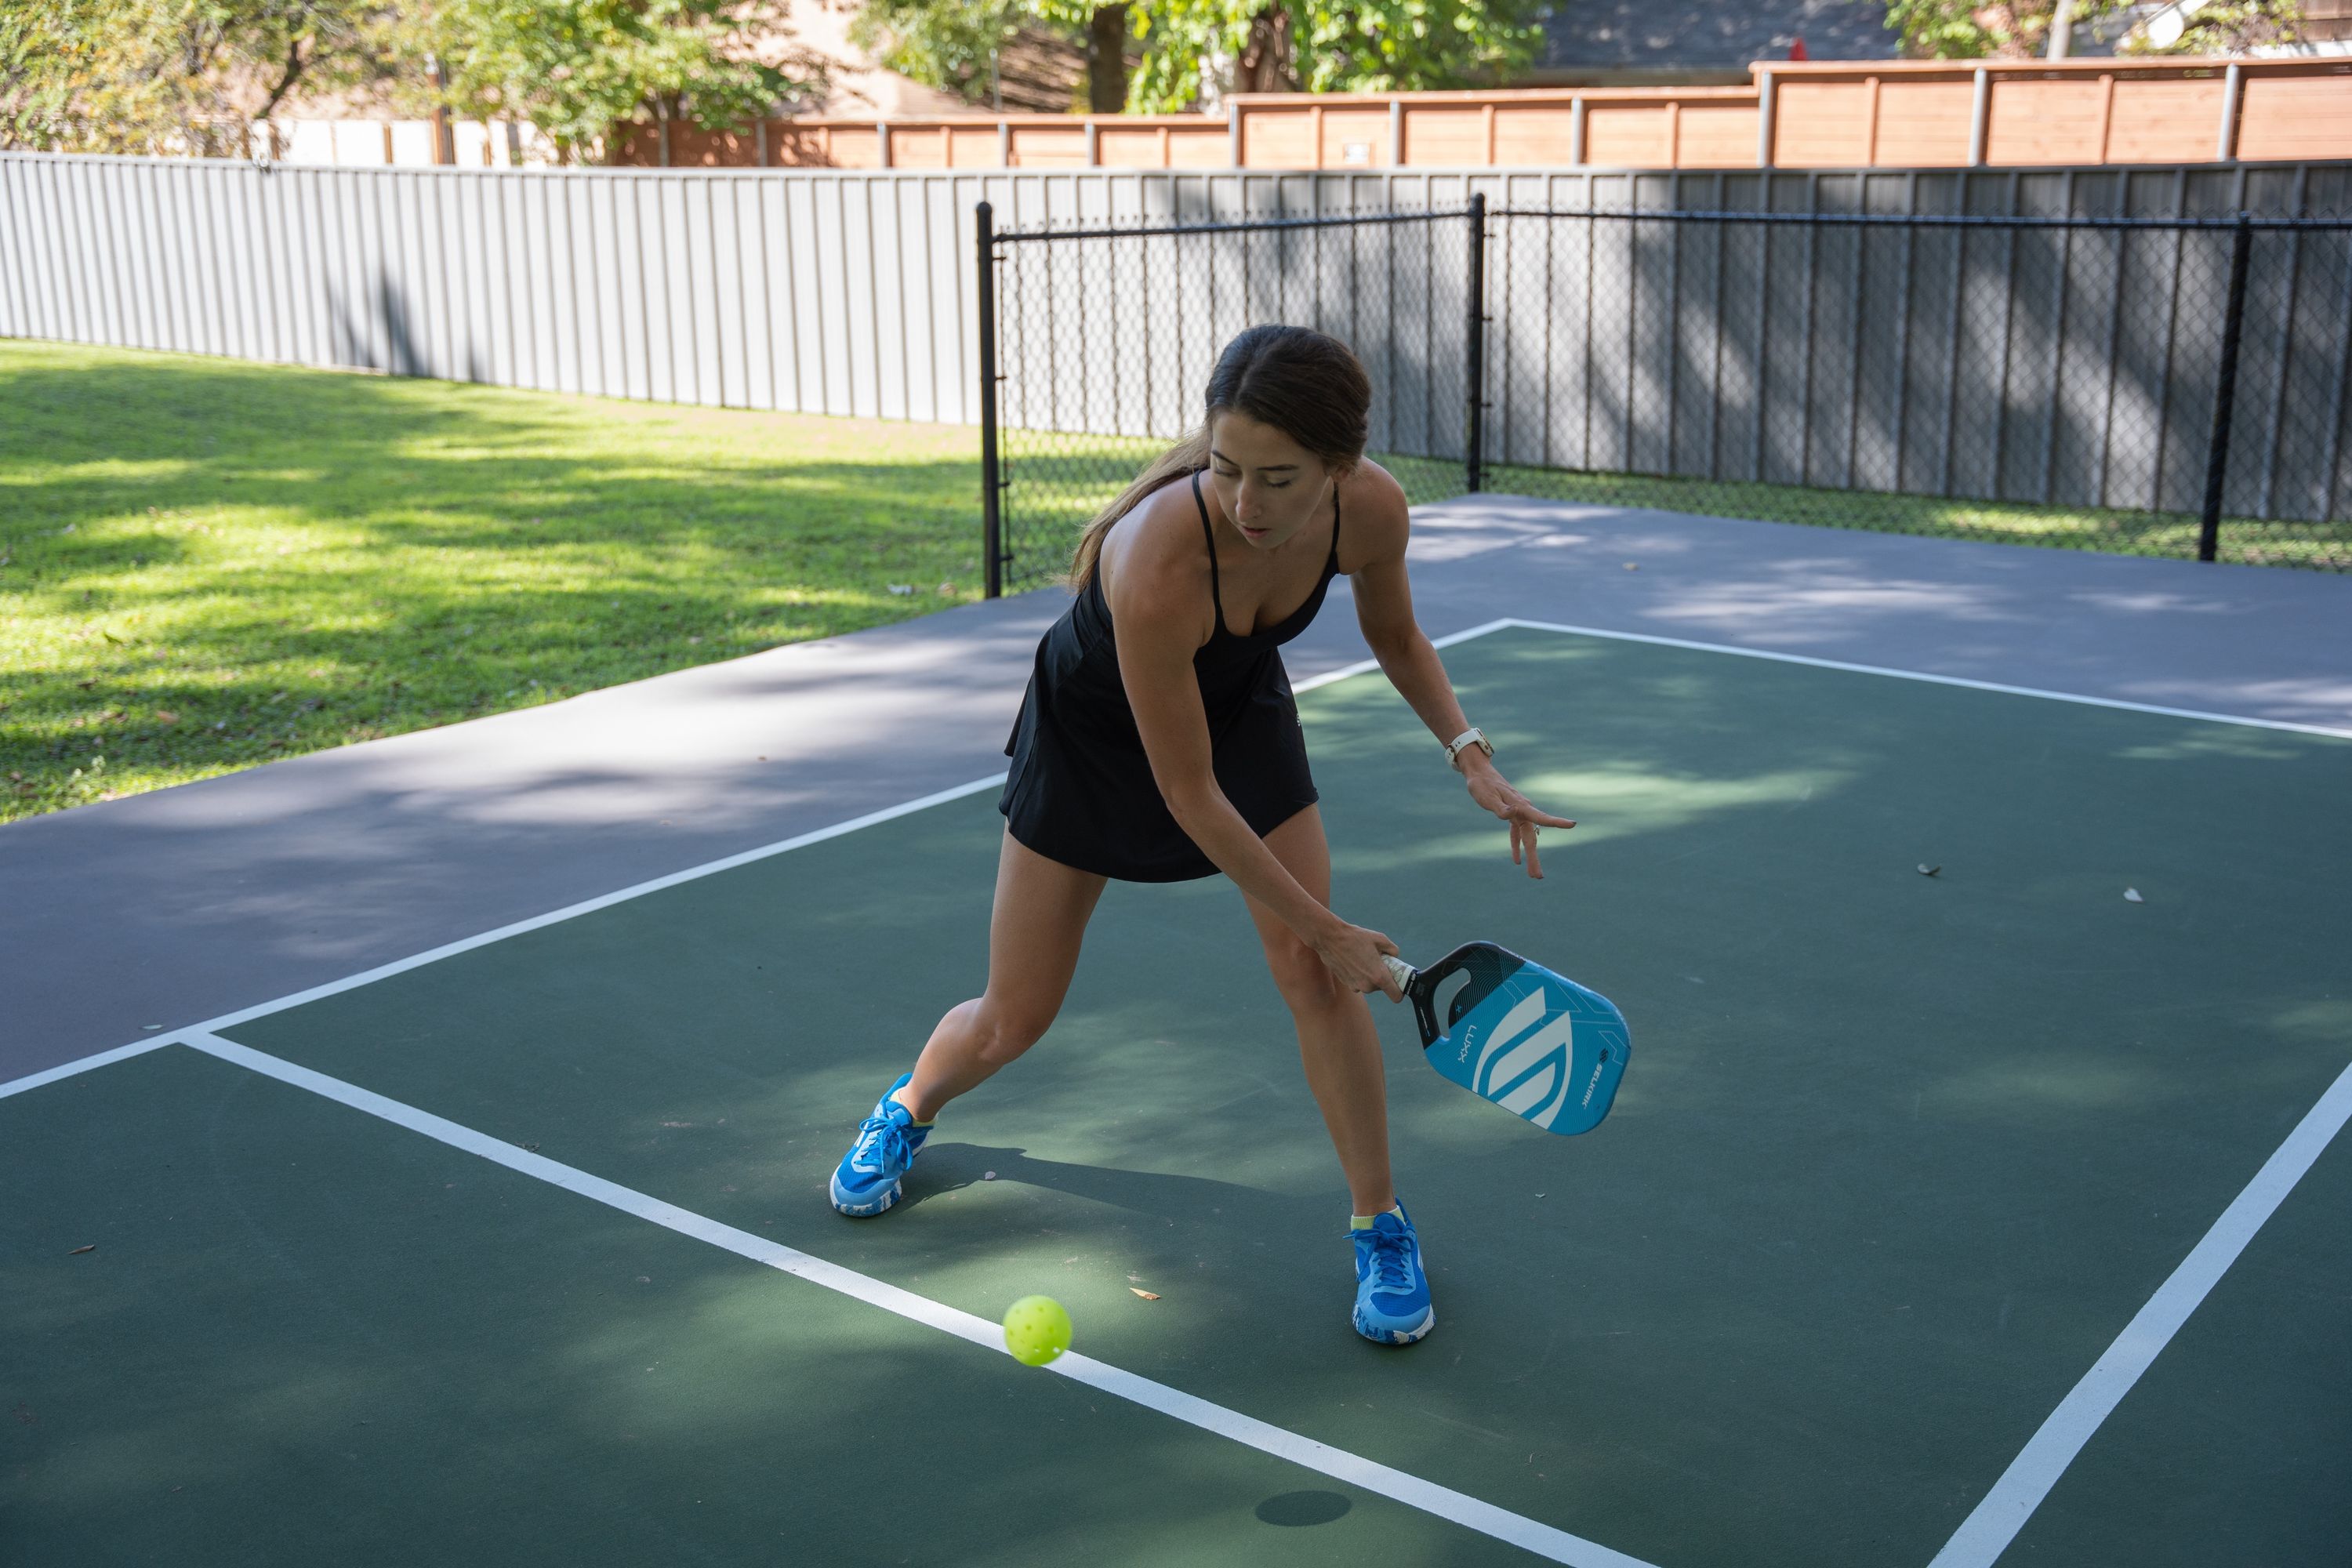 When learning to play pickleball, you will learn that the pickleball dink may be the most important concept you will learn.